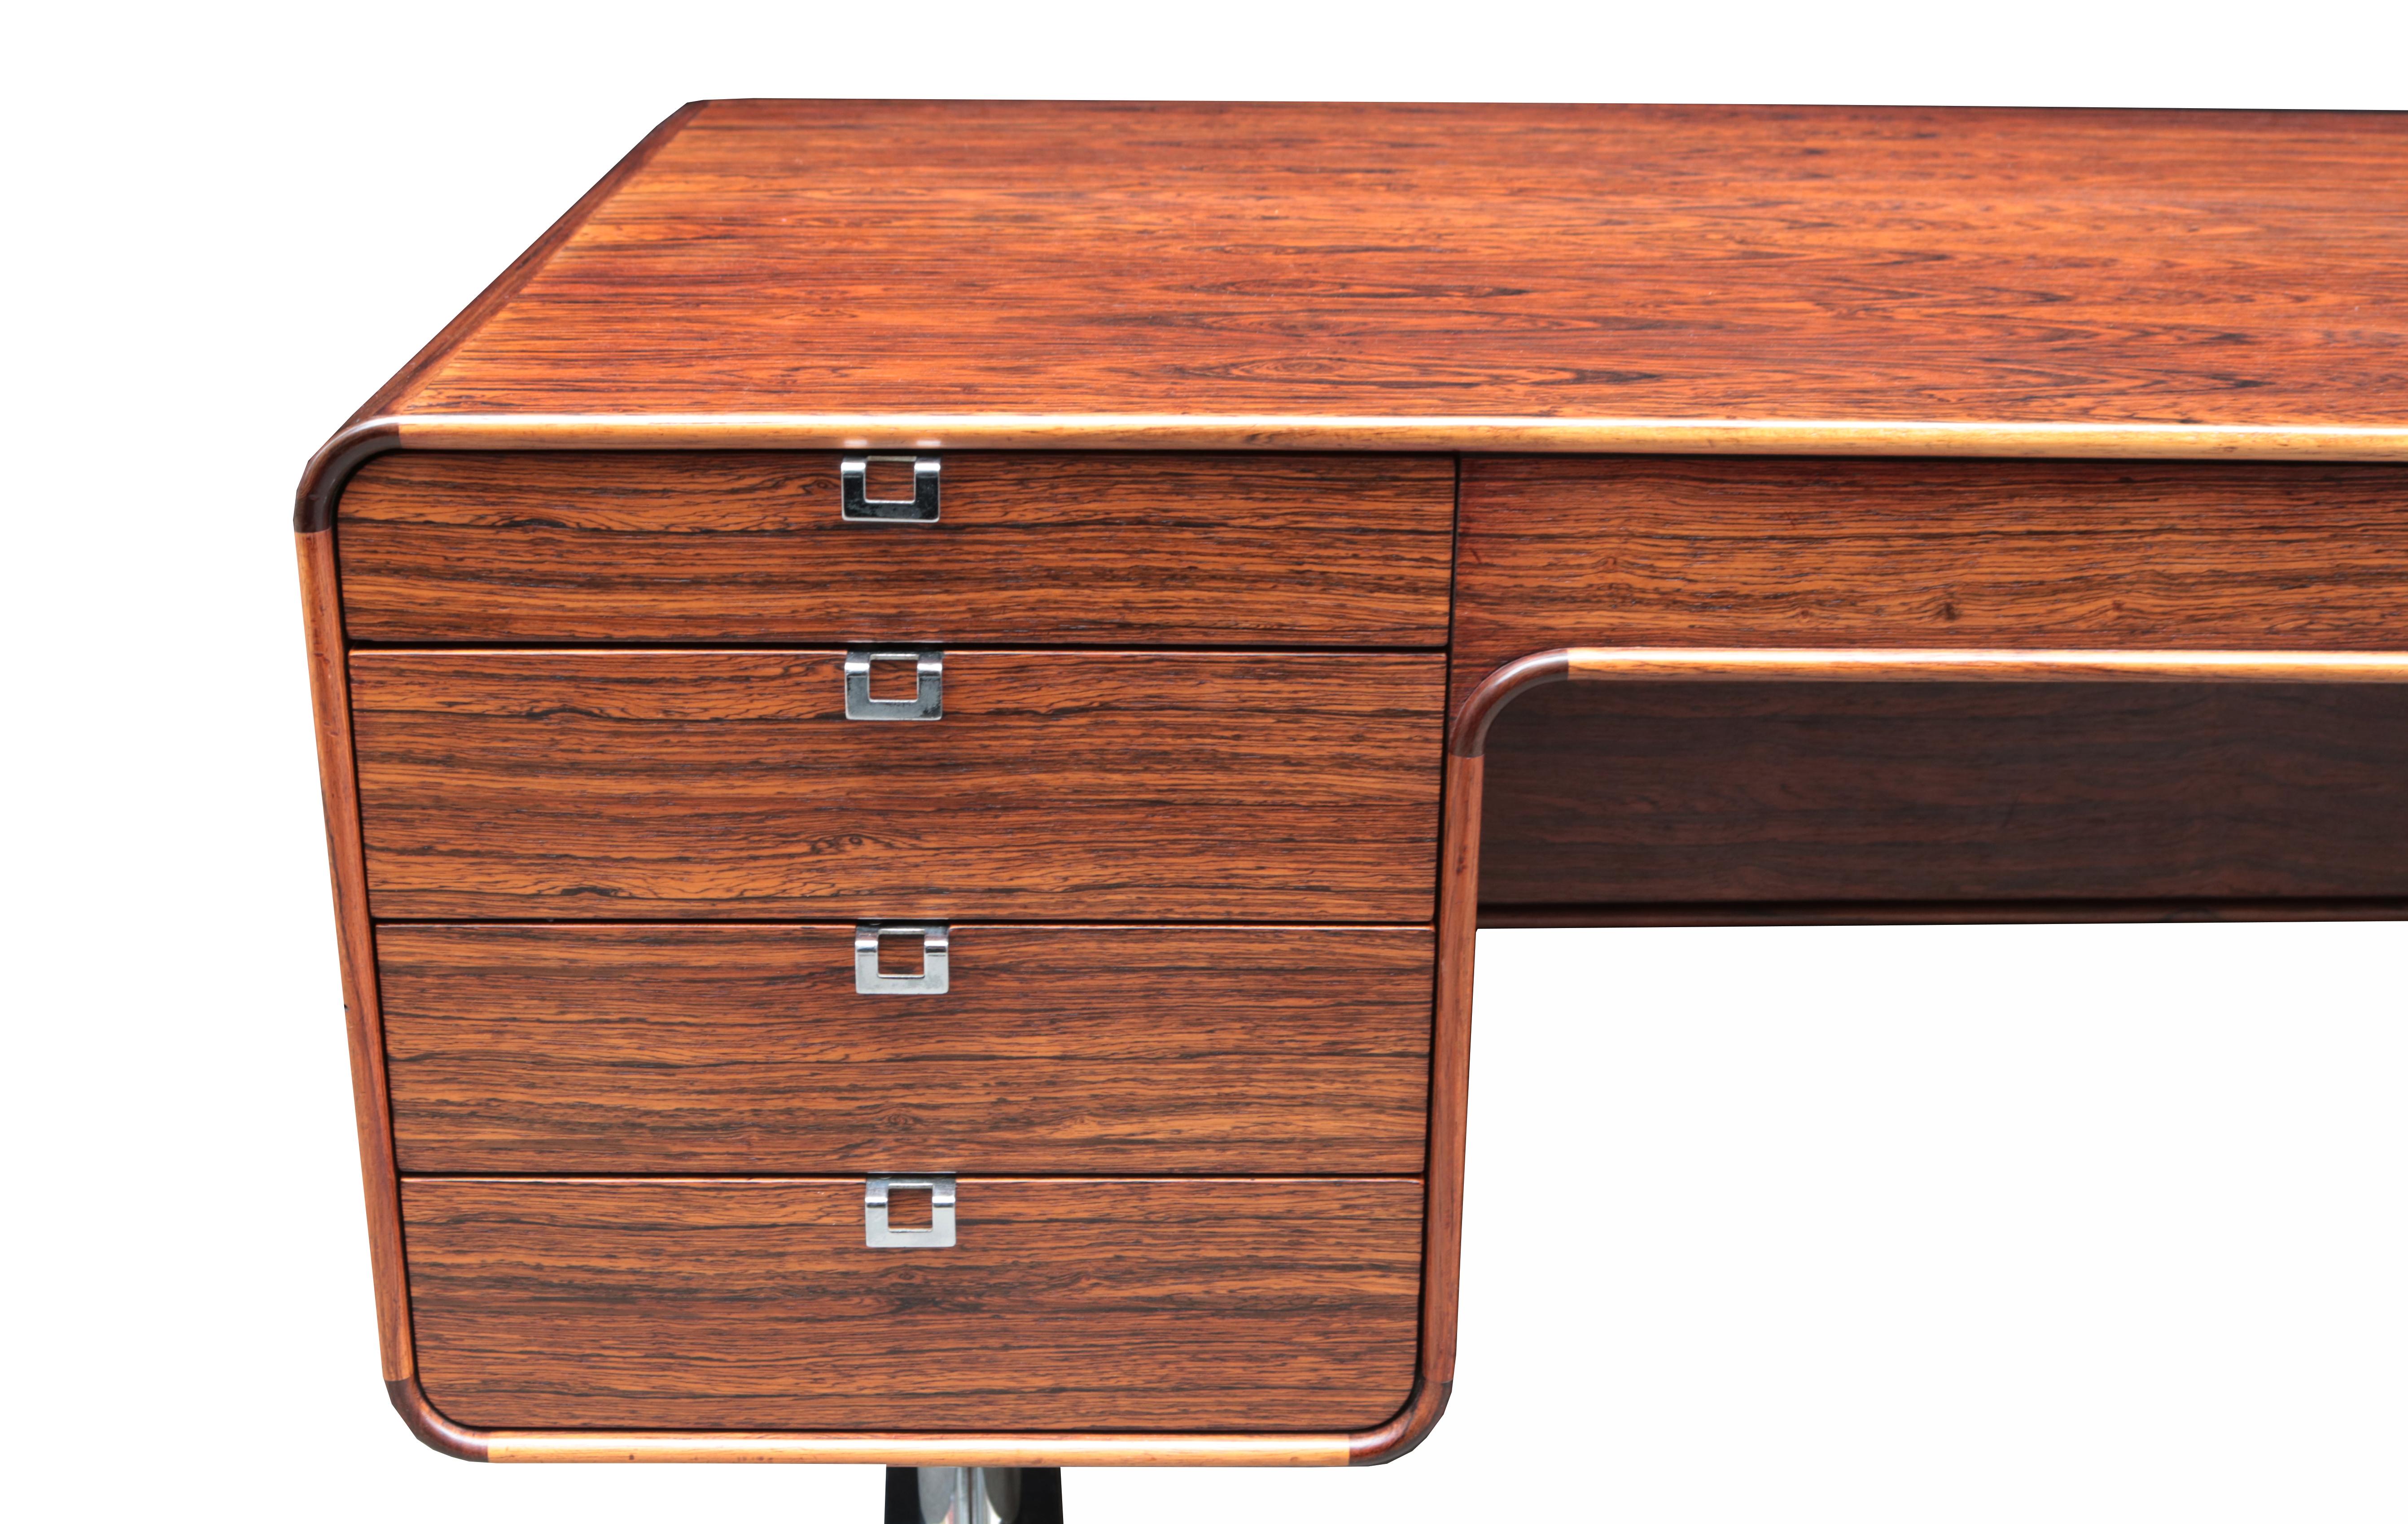 A Leif Jacobsen designed executive desk.
Rosewood with chromed metal legs and pulls.